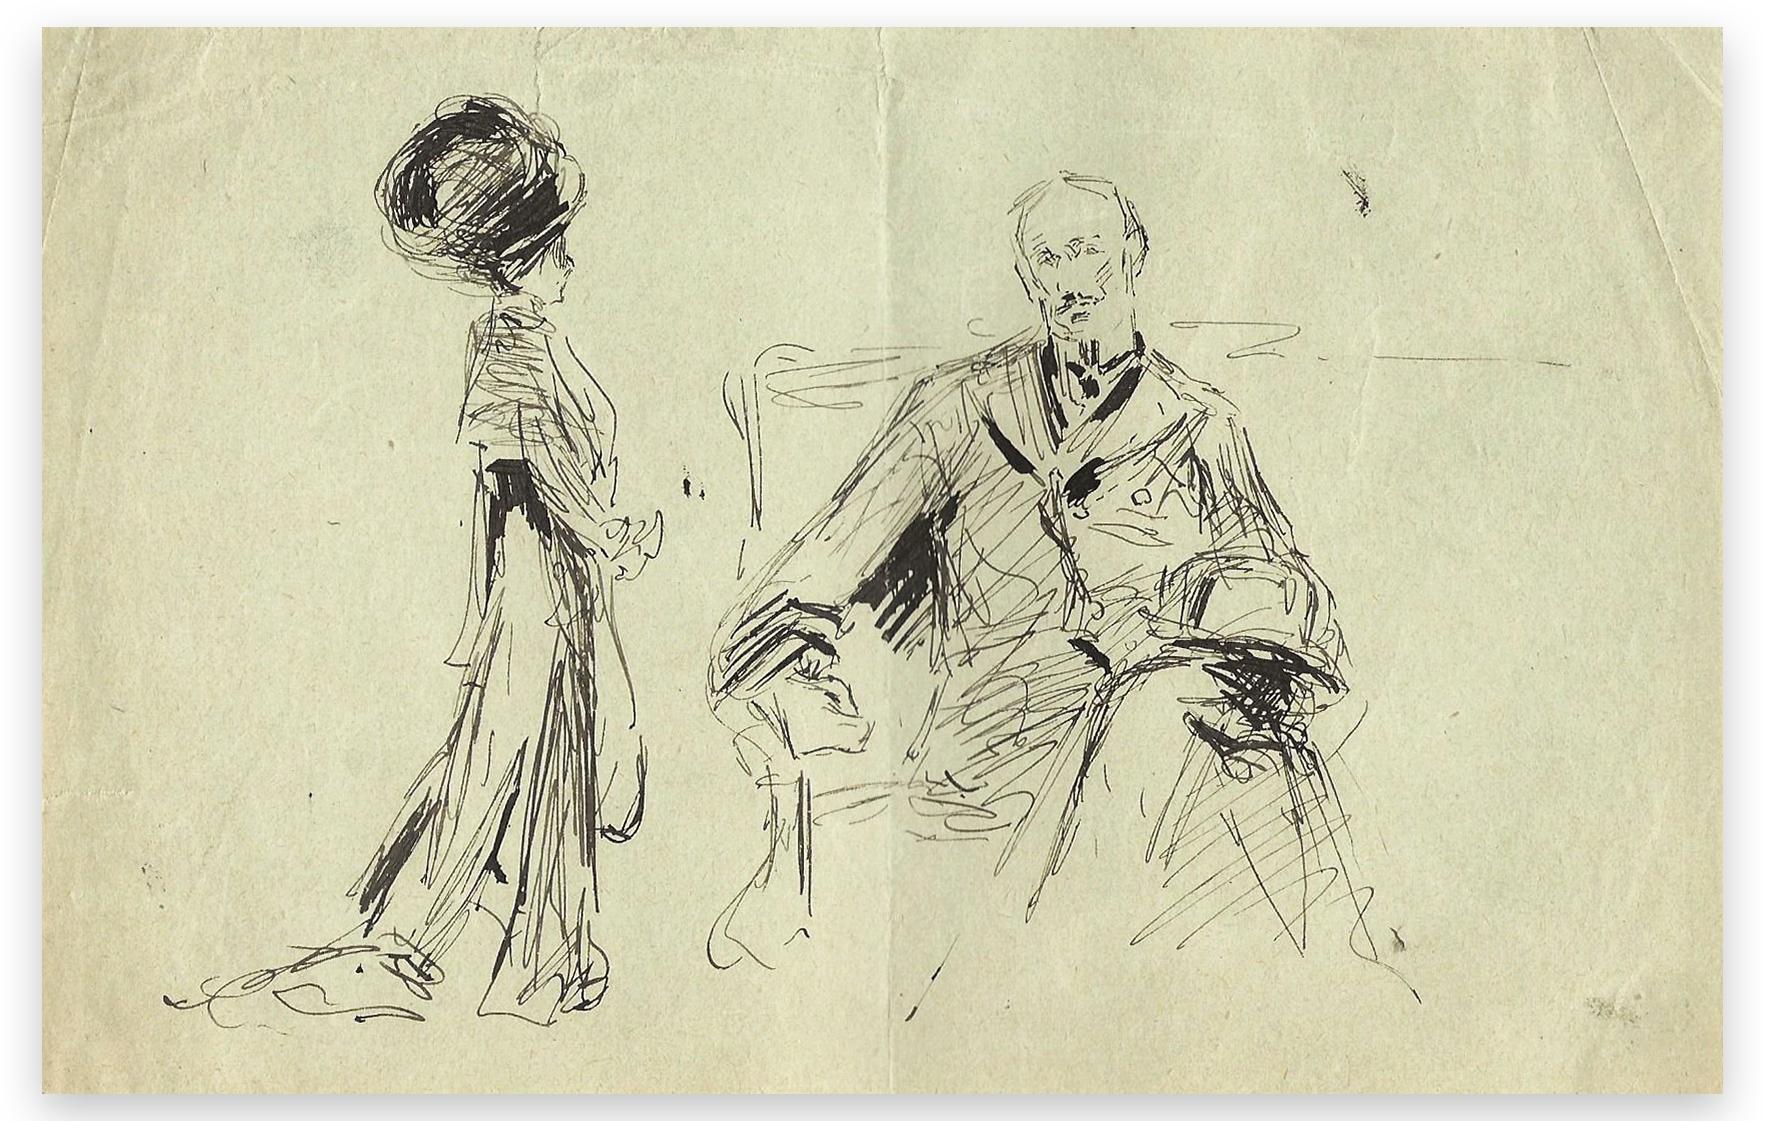 Man seated and woman with hat standing is an original artwork realized by Elie Anatole Pavil (1873-1948).

Original china ink drawing on paper. Image Dimensions: 13.5 x 21 cm

The state of preservation is good.

Unsigned. Sheet pasted on cardboard.